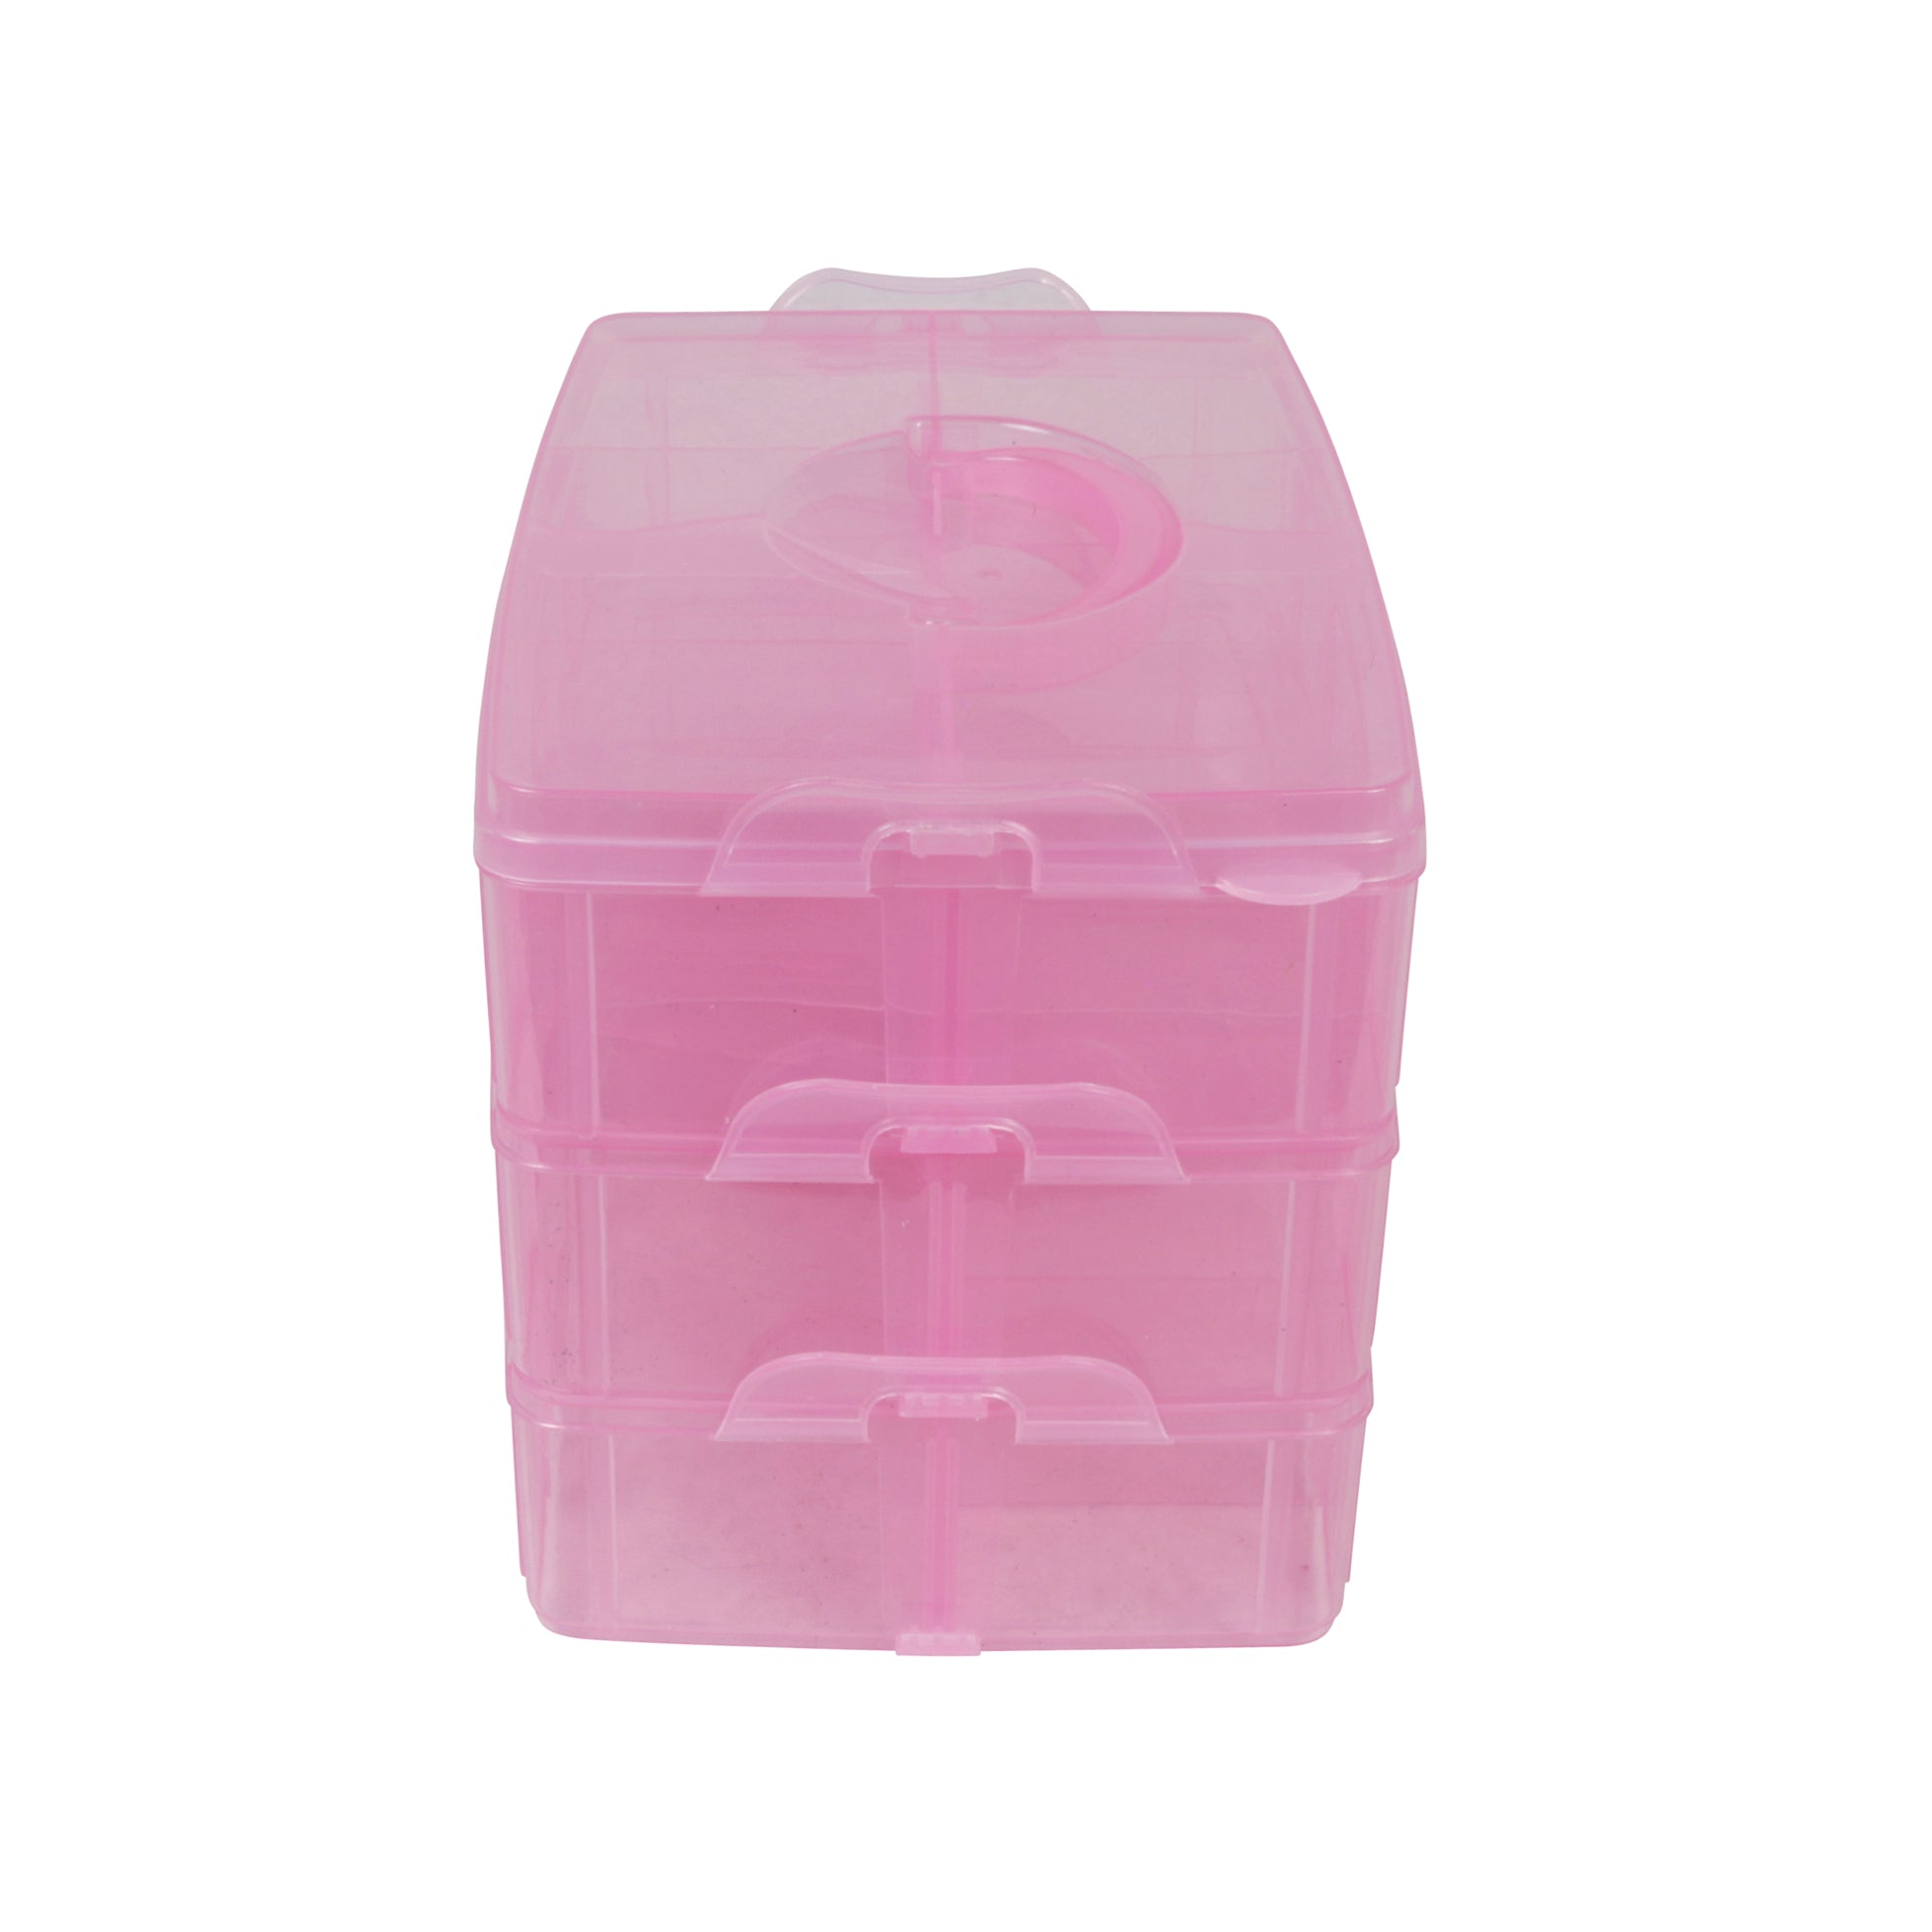 4 Compartment Detachable, Stackable, and Portion Controlled Food & Powder Storage  Containers by BariatricPal Color: Pink-Gray 